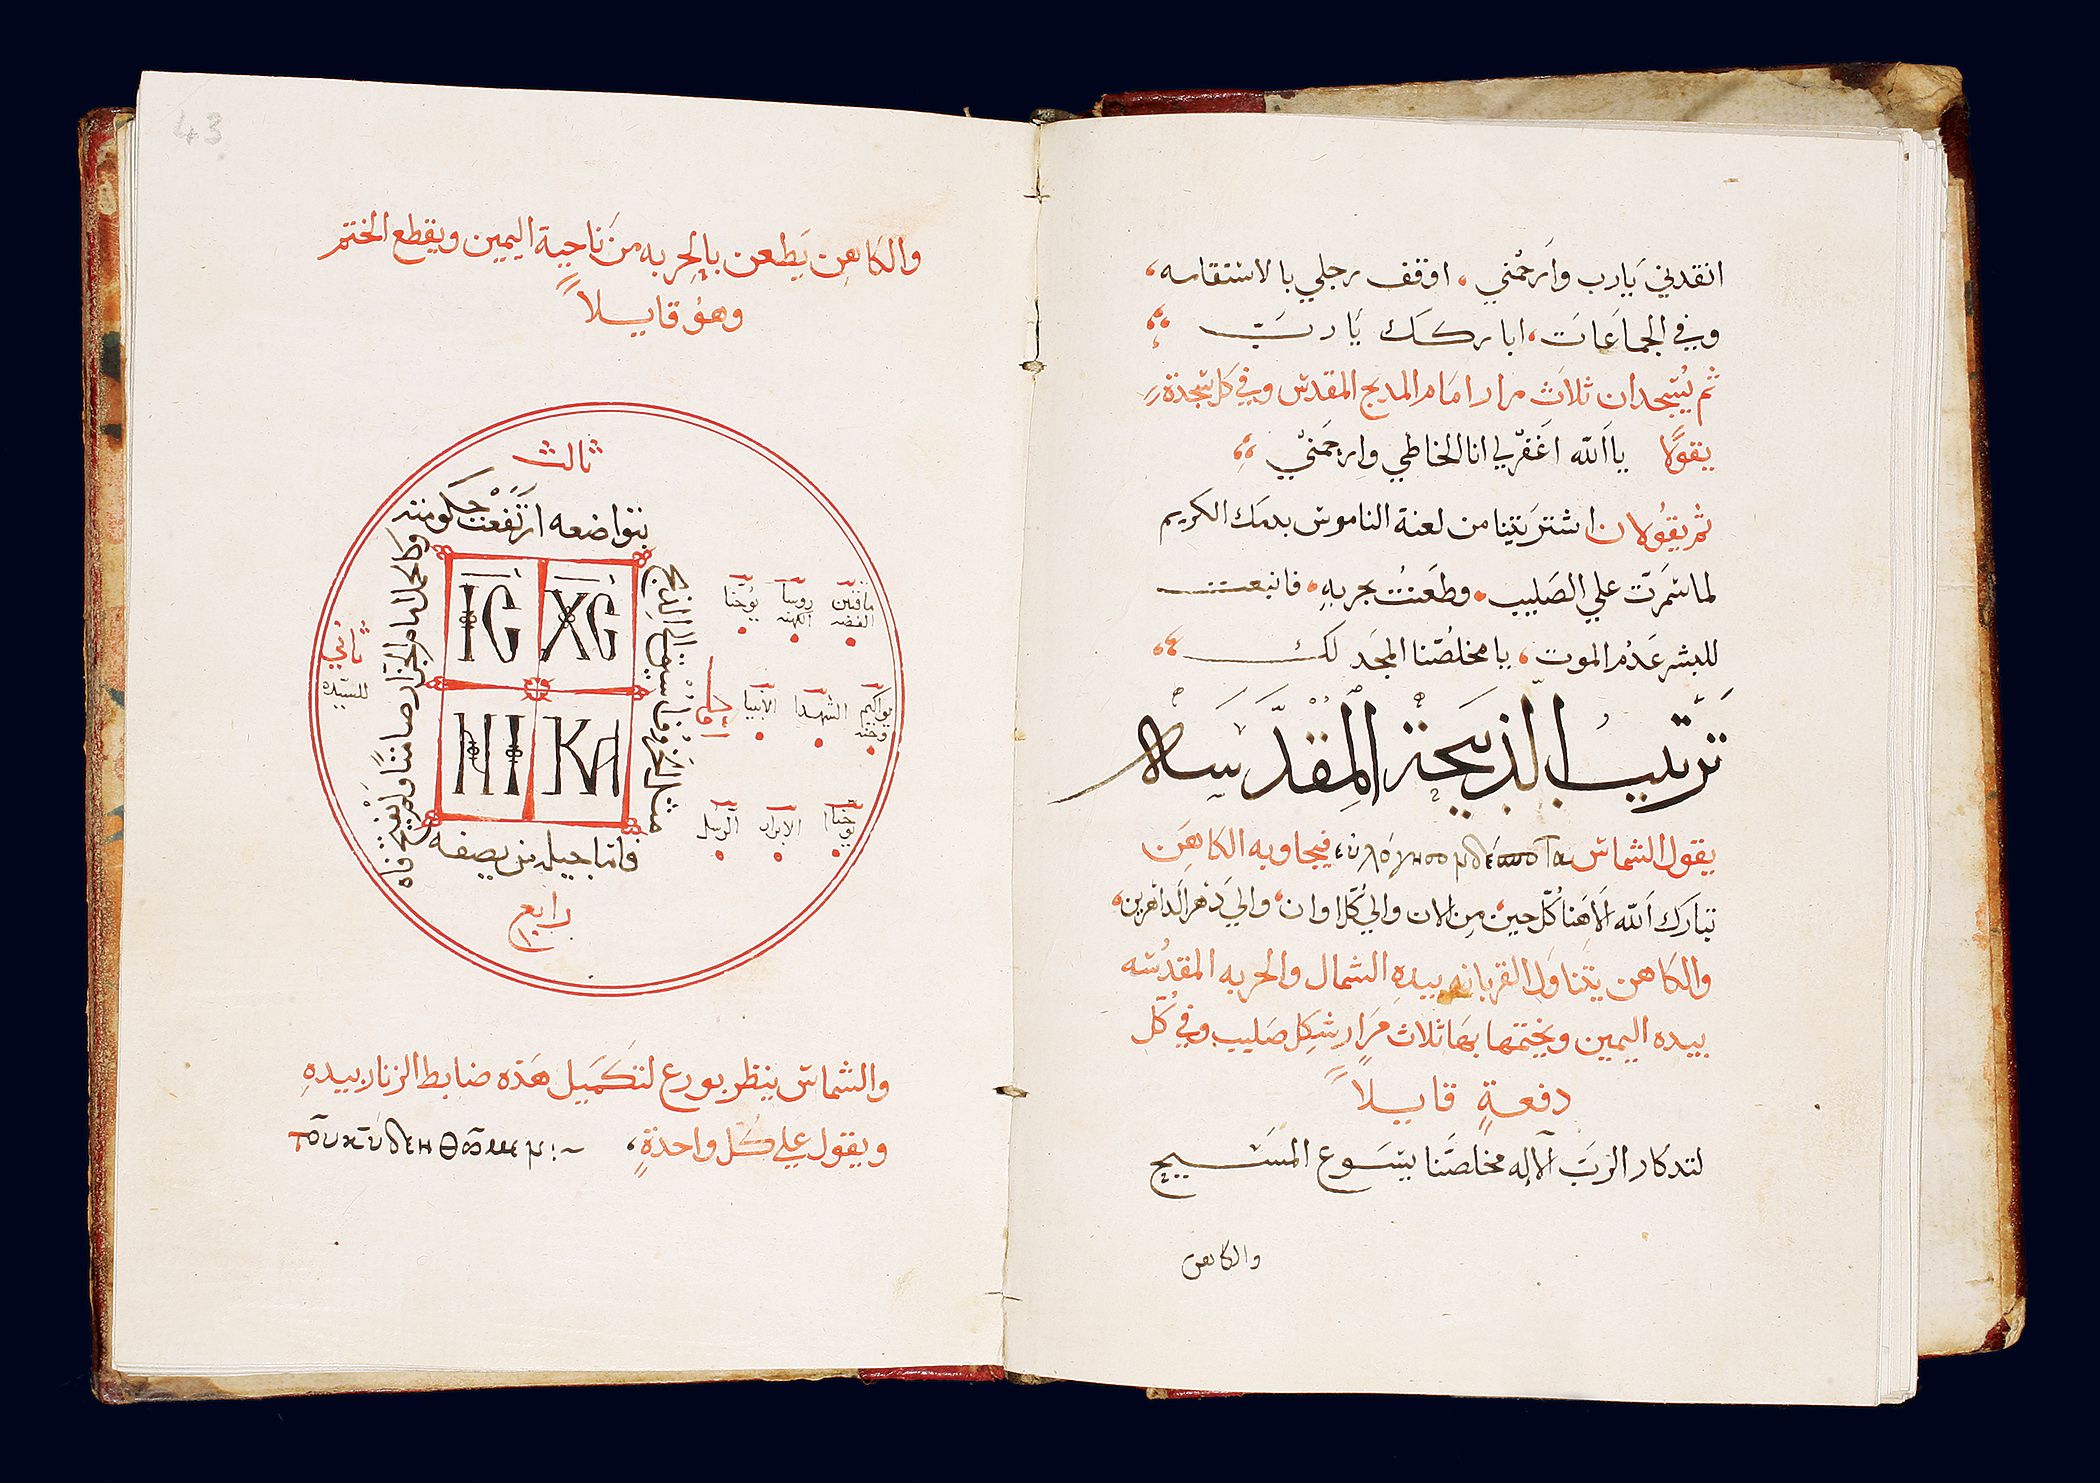 17th-c. liturgical book in Arabic from the library of the Melkite Greek Catholic Patriarchate, Damascus (<a href='https://w3id.org/vhmml/readingRoom/view/145007'>GCPD 00001</a>)